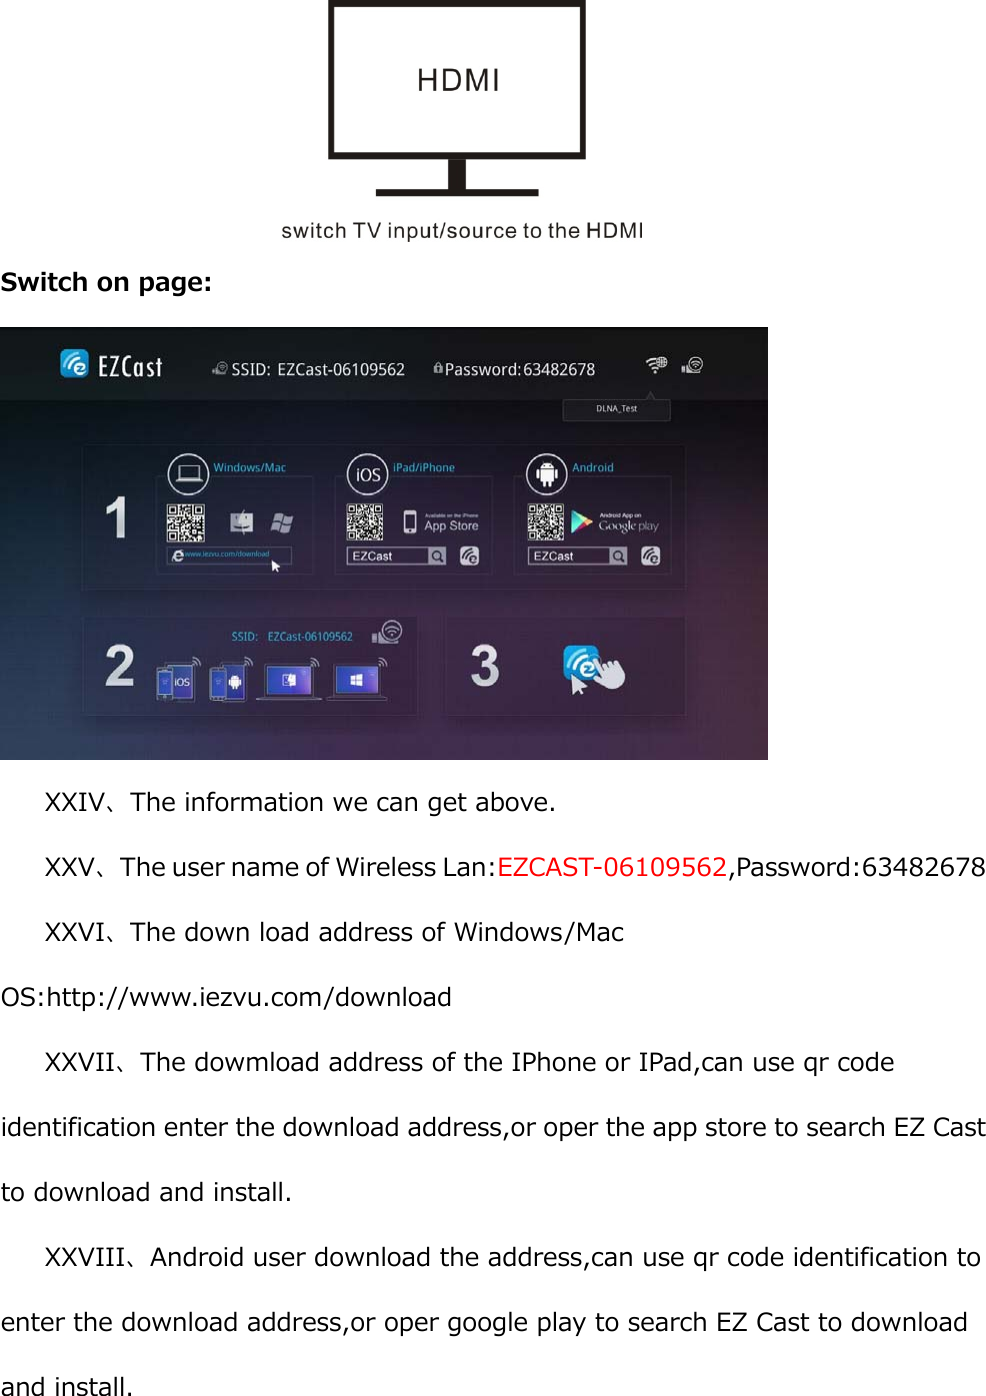  Switch on page:  XXIV、The information we can get above. XXV、The user name of Wireless Lan:EZCAST-06109562,Password:63482678 XXVI、The down load address of Windows/Mac OS:http://www.iezvu.com/download XXVII、The dowmload address of the IPhone or IPad,can use qr code identification enter the download address,or oper the app store to search EZ Cast to download and install. XXVIII、Android user download the address,can use qr code identification to enter the download address,or oper google play to search EZ Cast to download and install. 